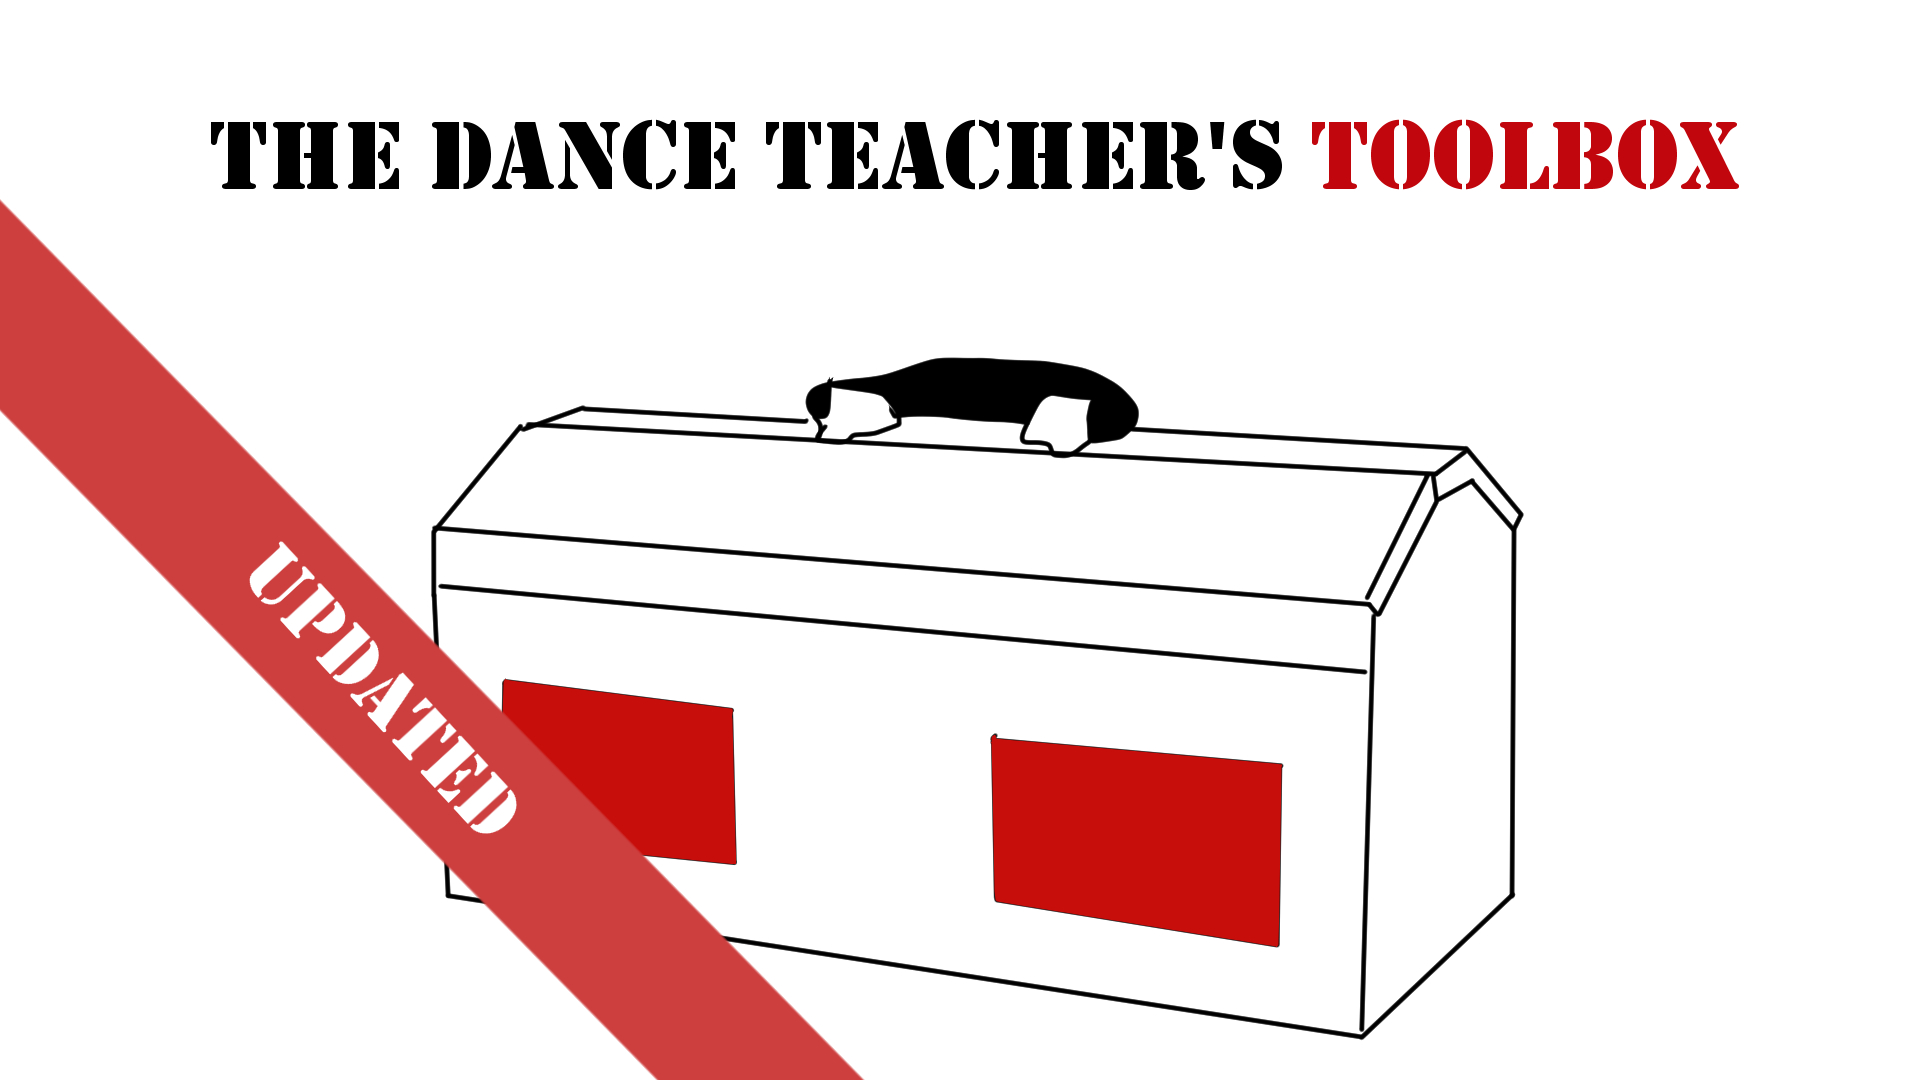 The Dance Teacher's Toolbox: a collection of tools for teaching dance